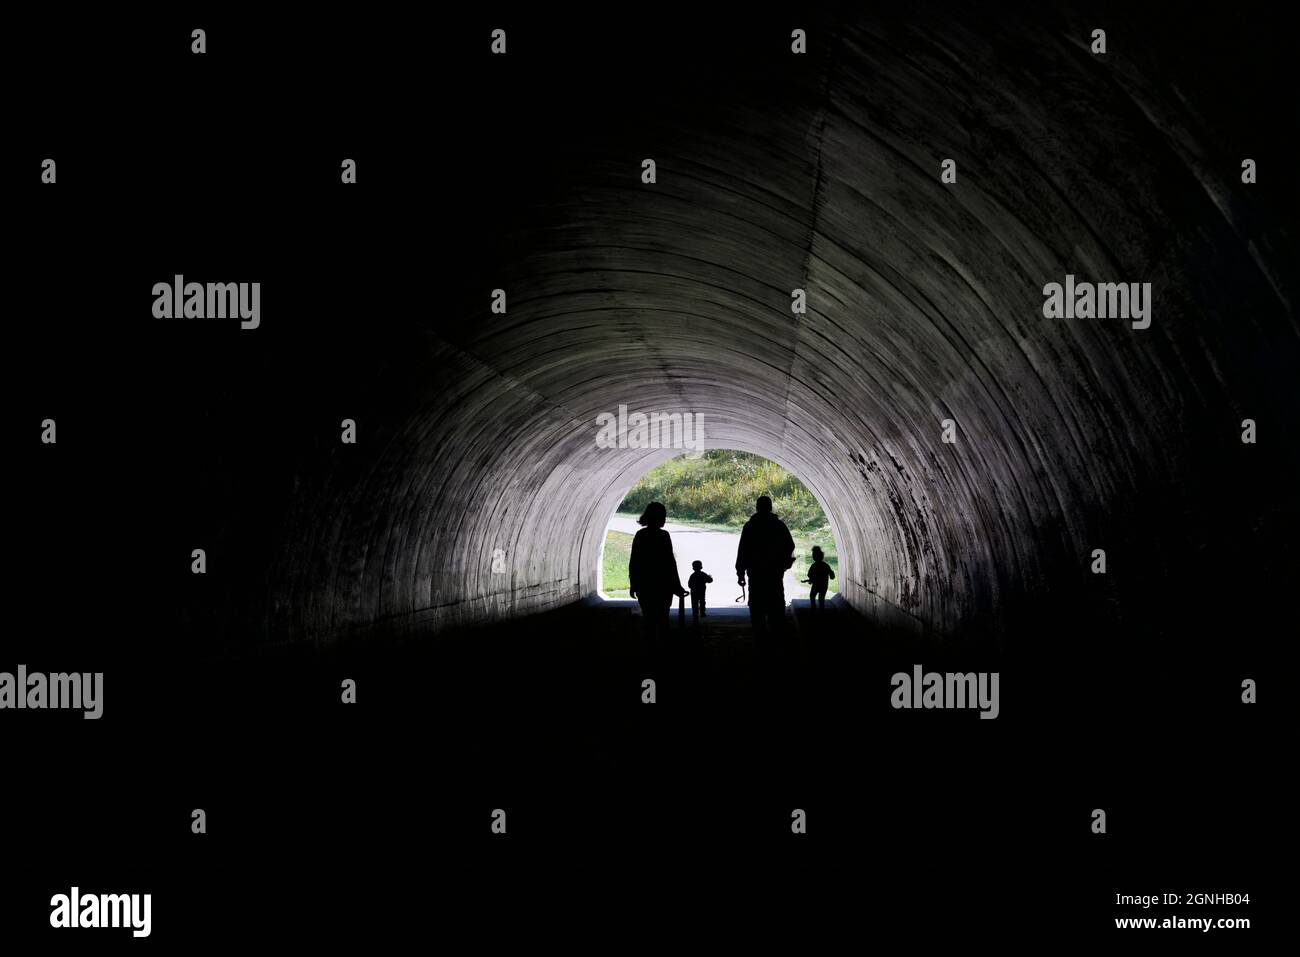 Silhouette of the family with light at the end of the tunnel in a public park Stock Photo